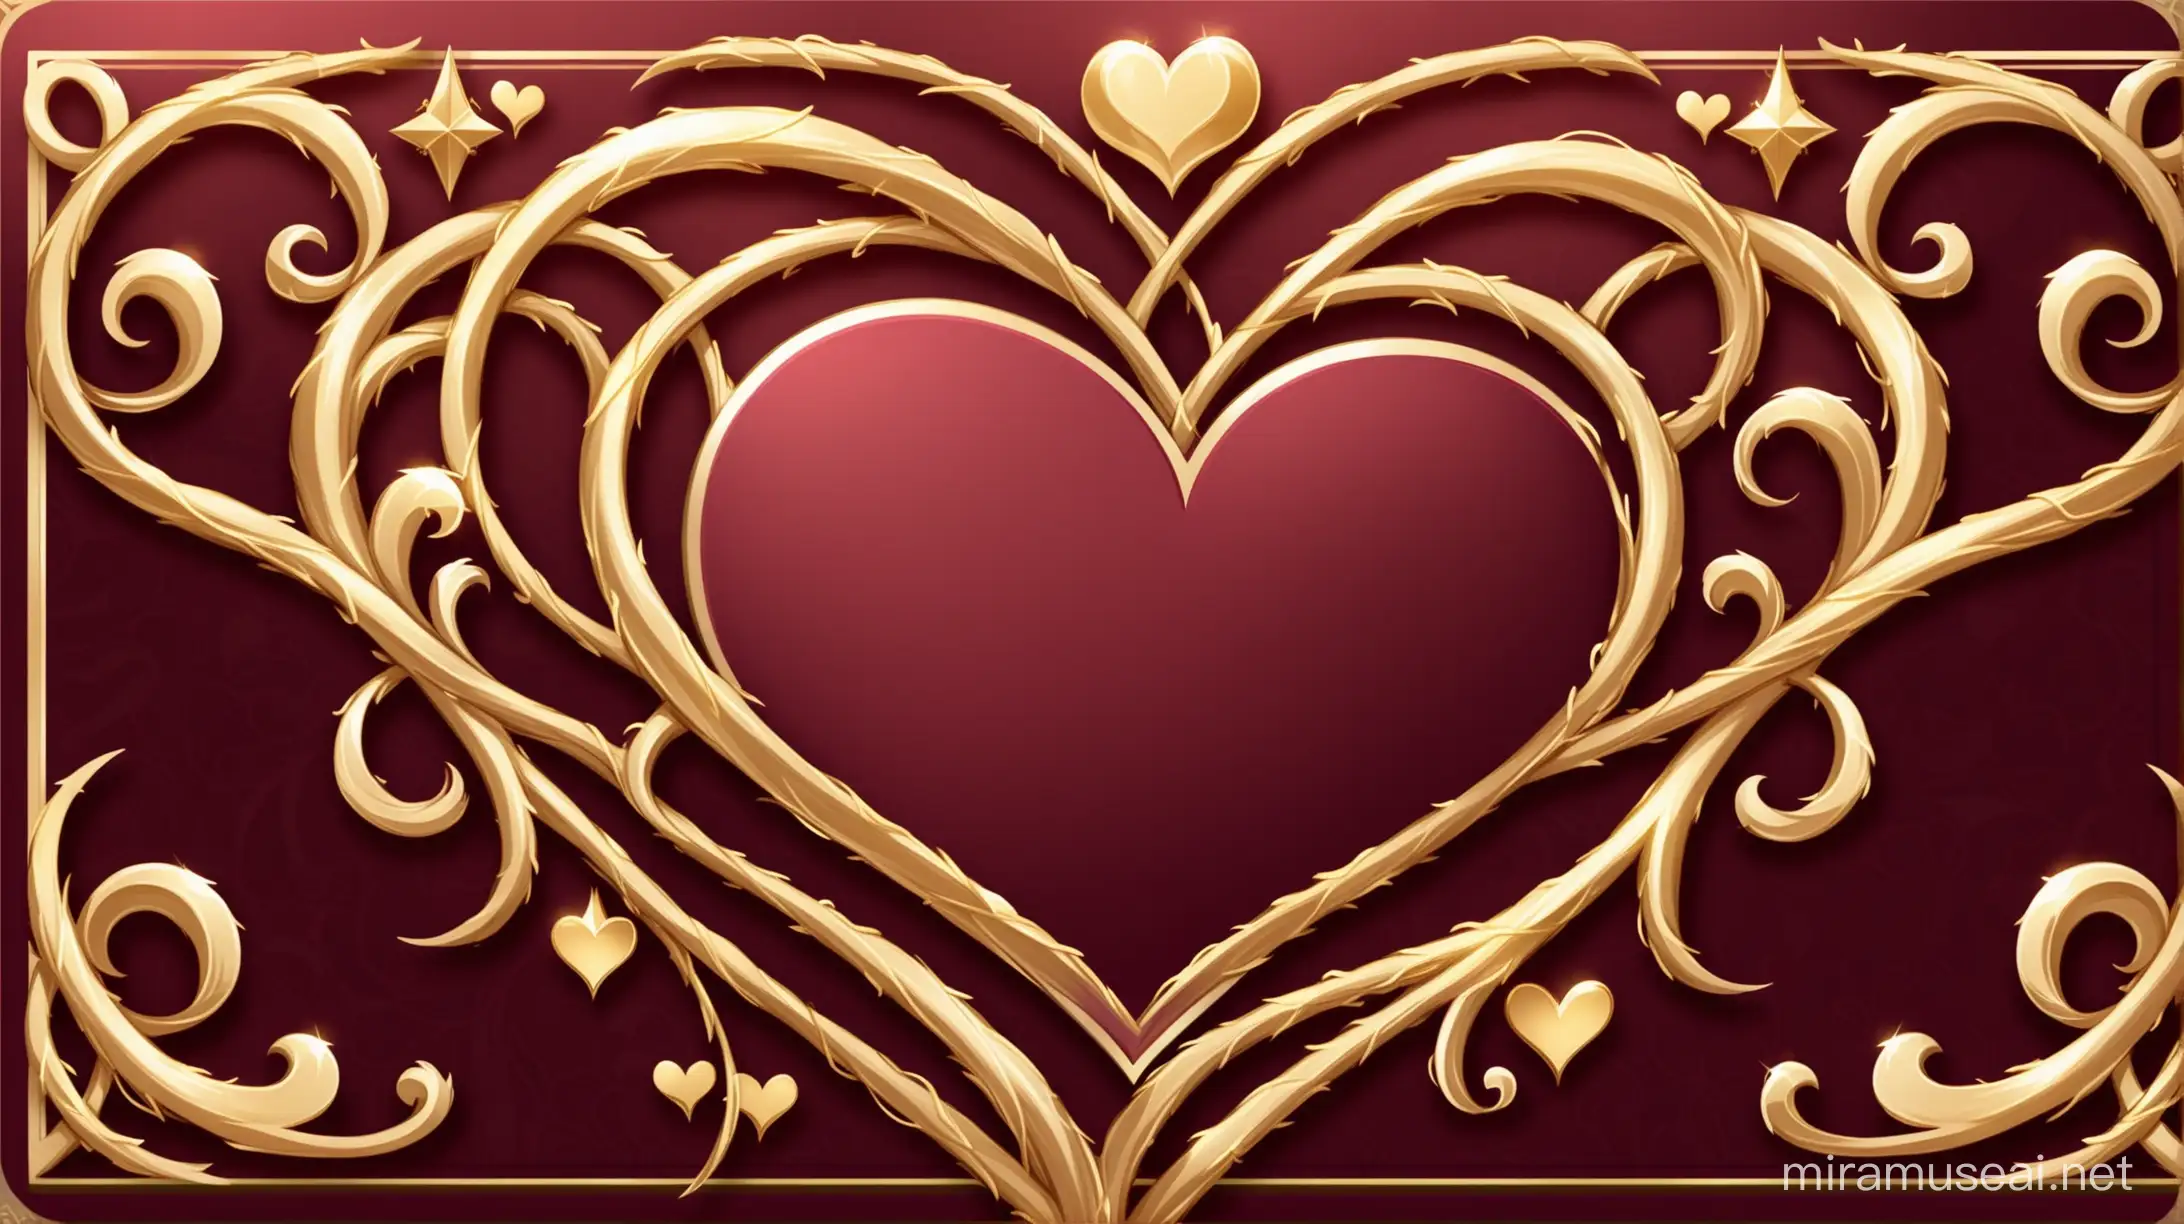 Make a background that is the color burgundy, with a design of intricate golden hearts. It is a namecard like in genshin impact. The heart is a military symbol.  THE WORD ISNT BURGUNDY. The sides have golden hearts and golden vines